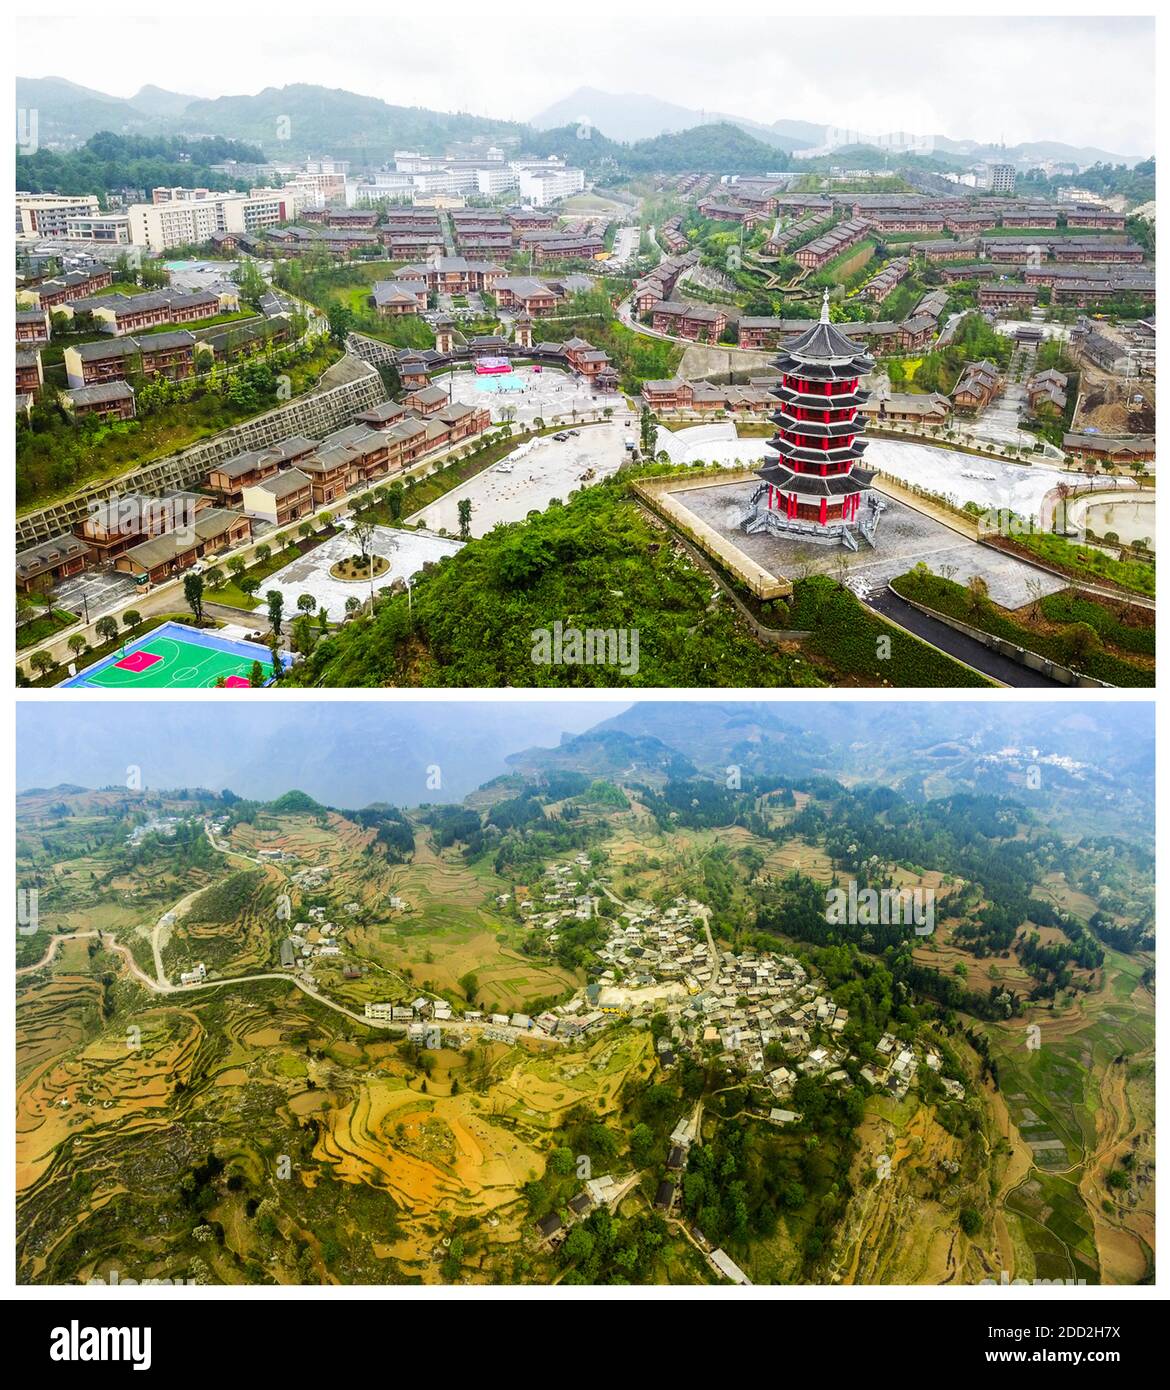 (201124) -- GUIYANG, Nov. 24, 2020 (Xinhua) -- In this combo photo, the upper aerial photo taken on June 6, 2019 by Yang Wenbin shows the new look of the Ameiqituo Town and the lower aerial photo taken in 2017 by Wen Sen shows the Sanbao Village before relocation in Qinglong County, southwest China's Guizhou Province. China has achieved the feat of removing all remaining counties from the country's poverty list. The last nine impoverished counties, all in southwest China's Guizhou Province, have eliminated absolute poverty, the provincial government announced on Monday. This means that all Stock Photo